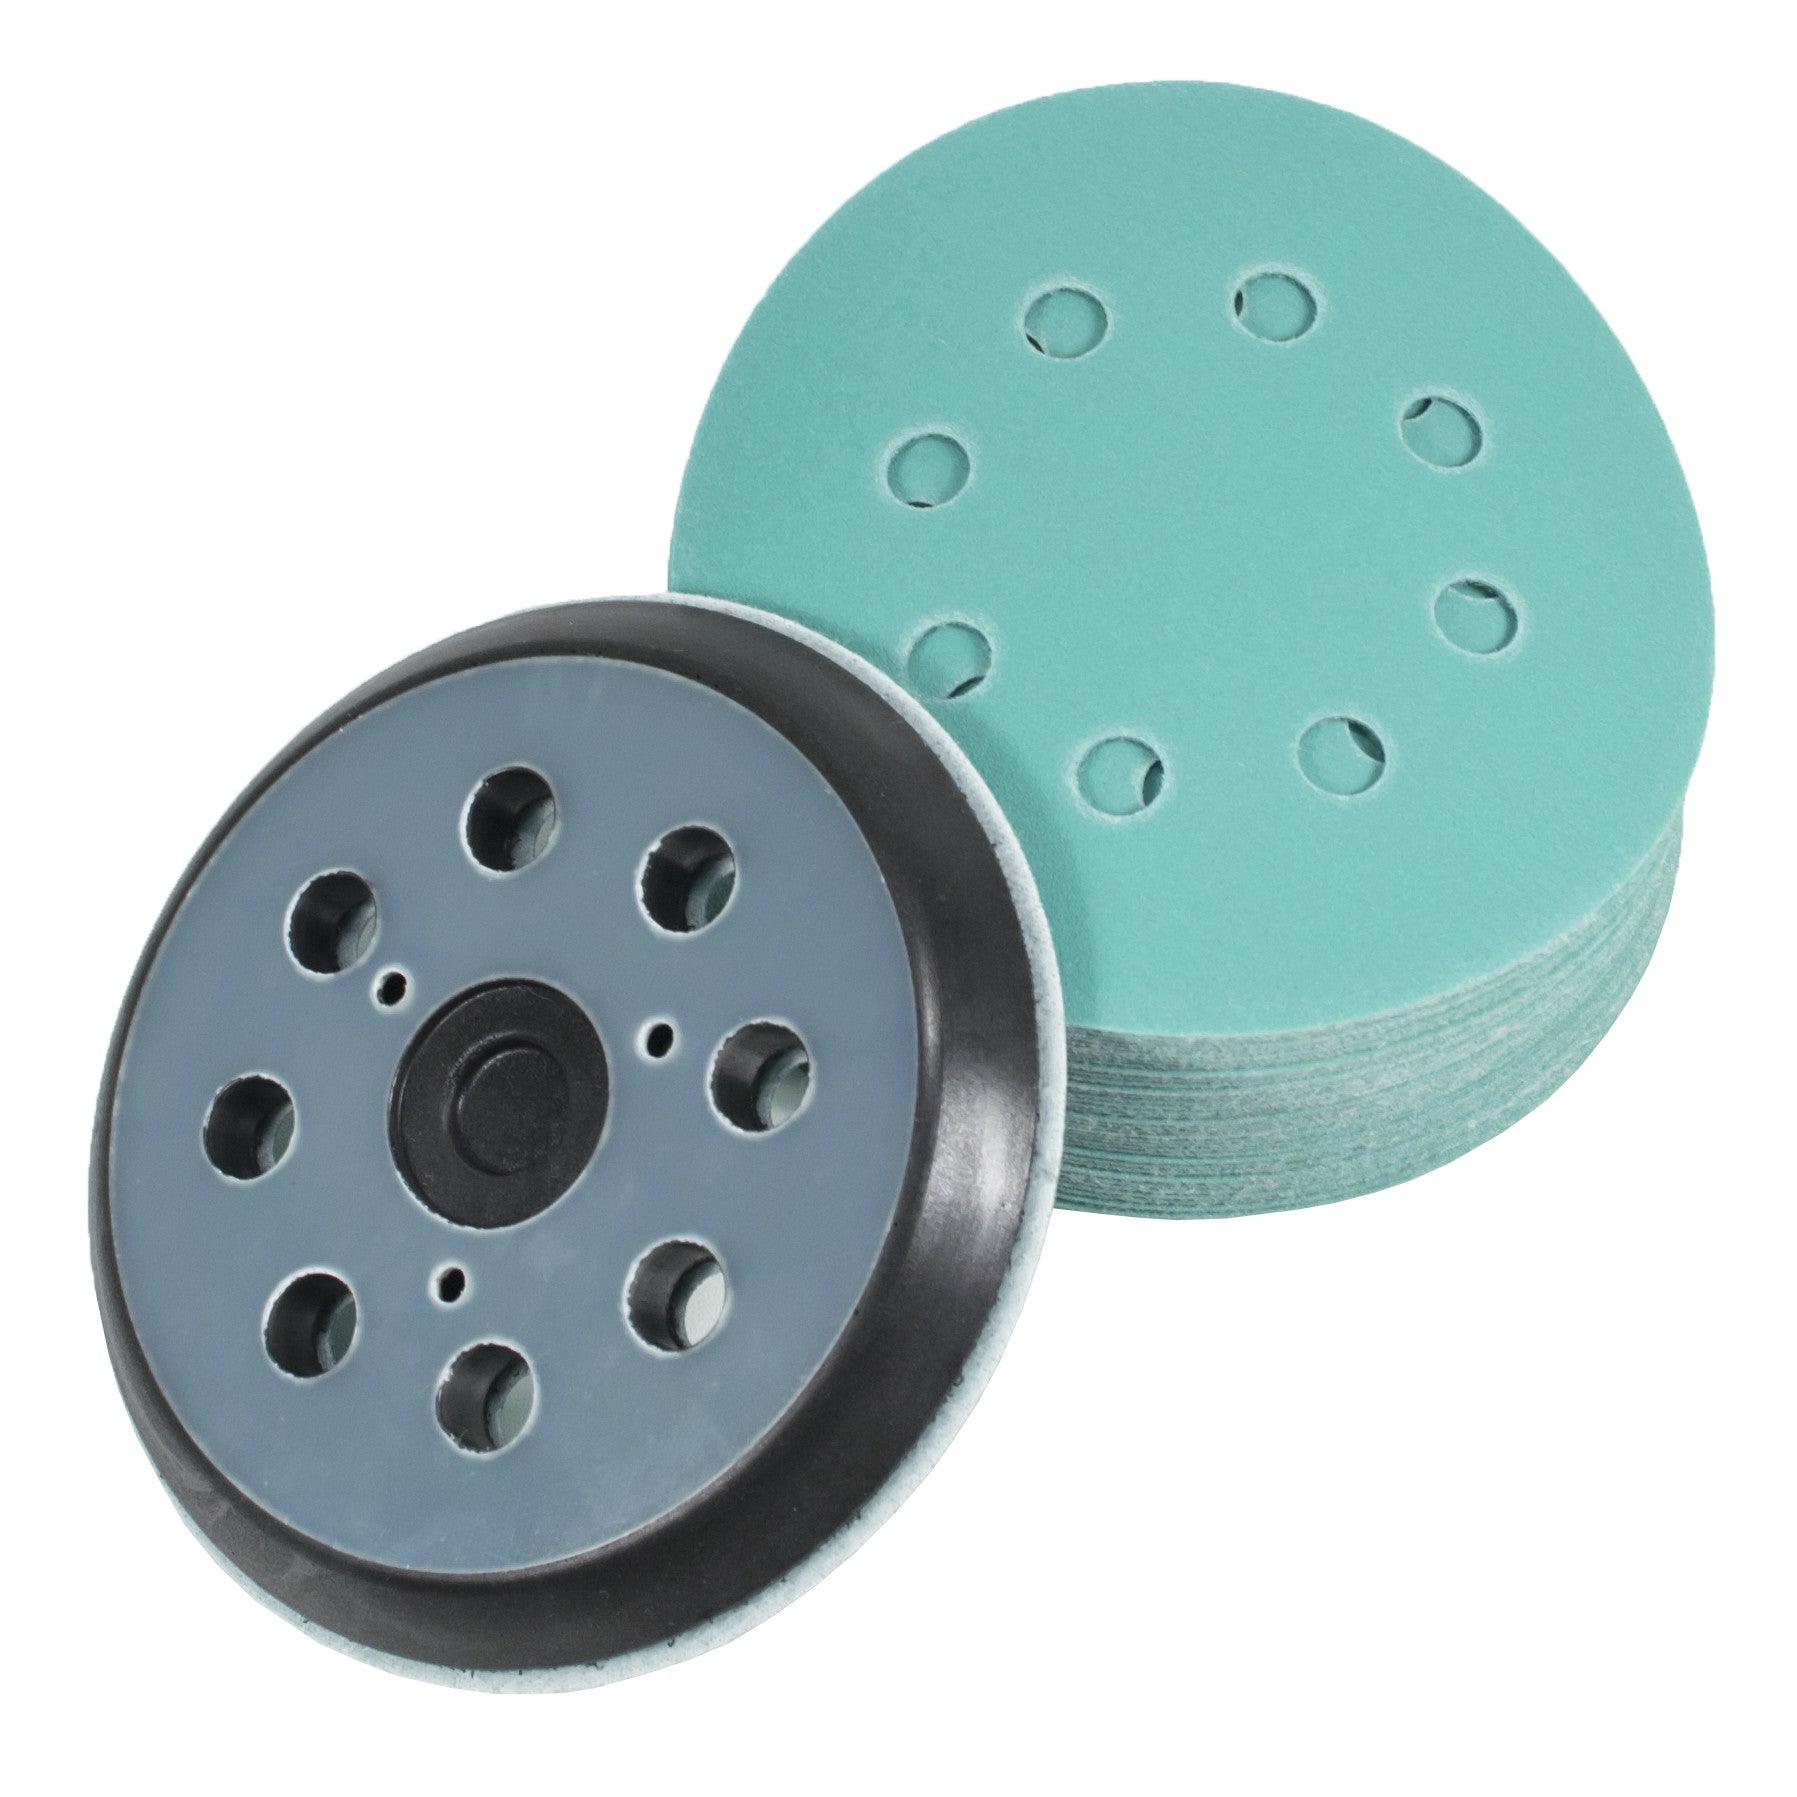 Copy of Copy of (40 Pack) 5" 8 Hole 220 Grit Sanding Disc Paper with 5" 8 Hole Hook and Loop Pad